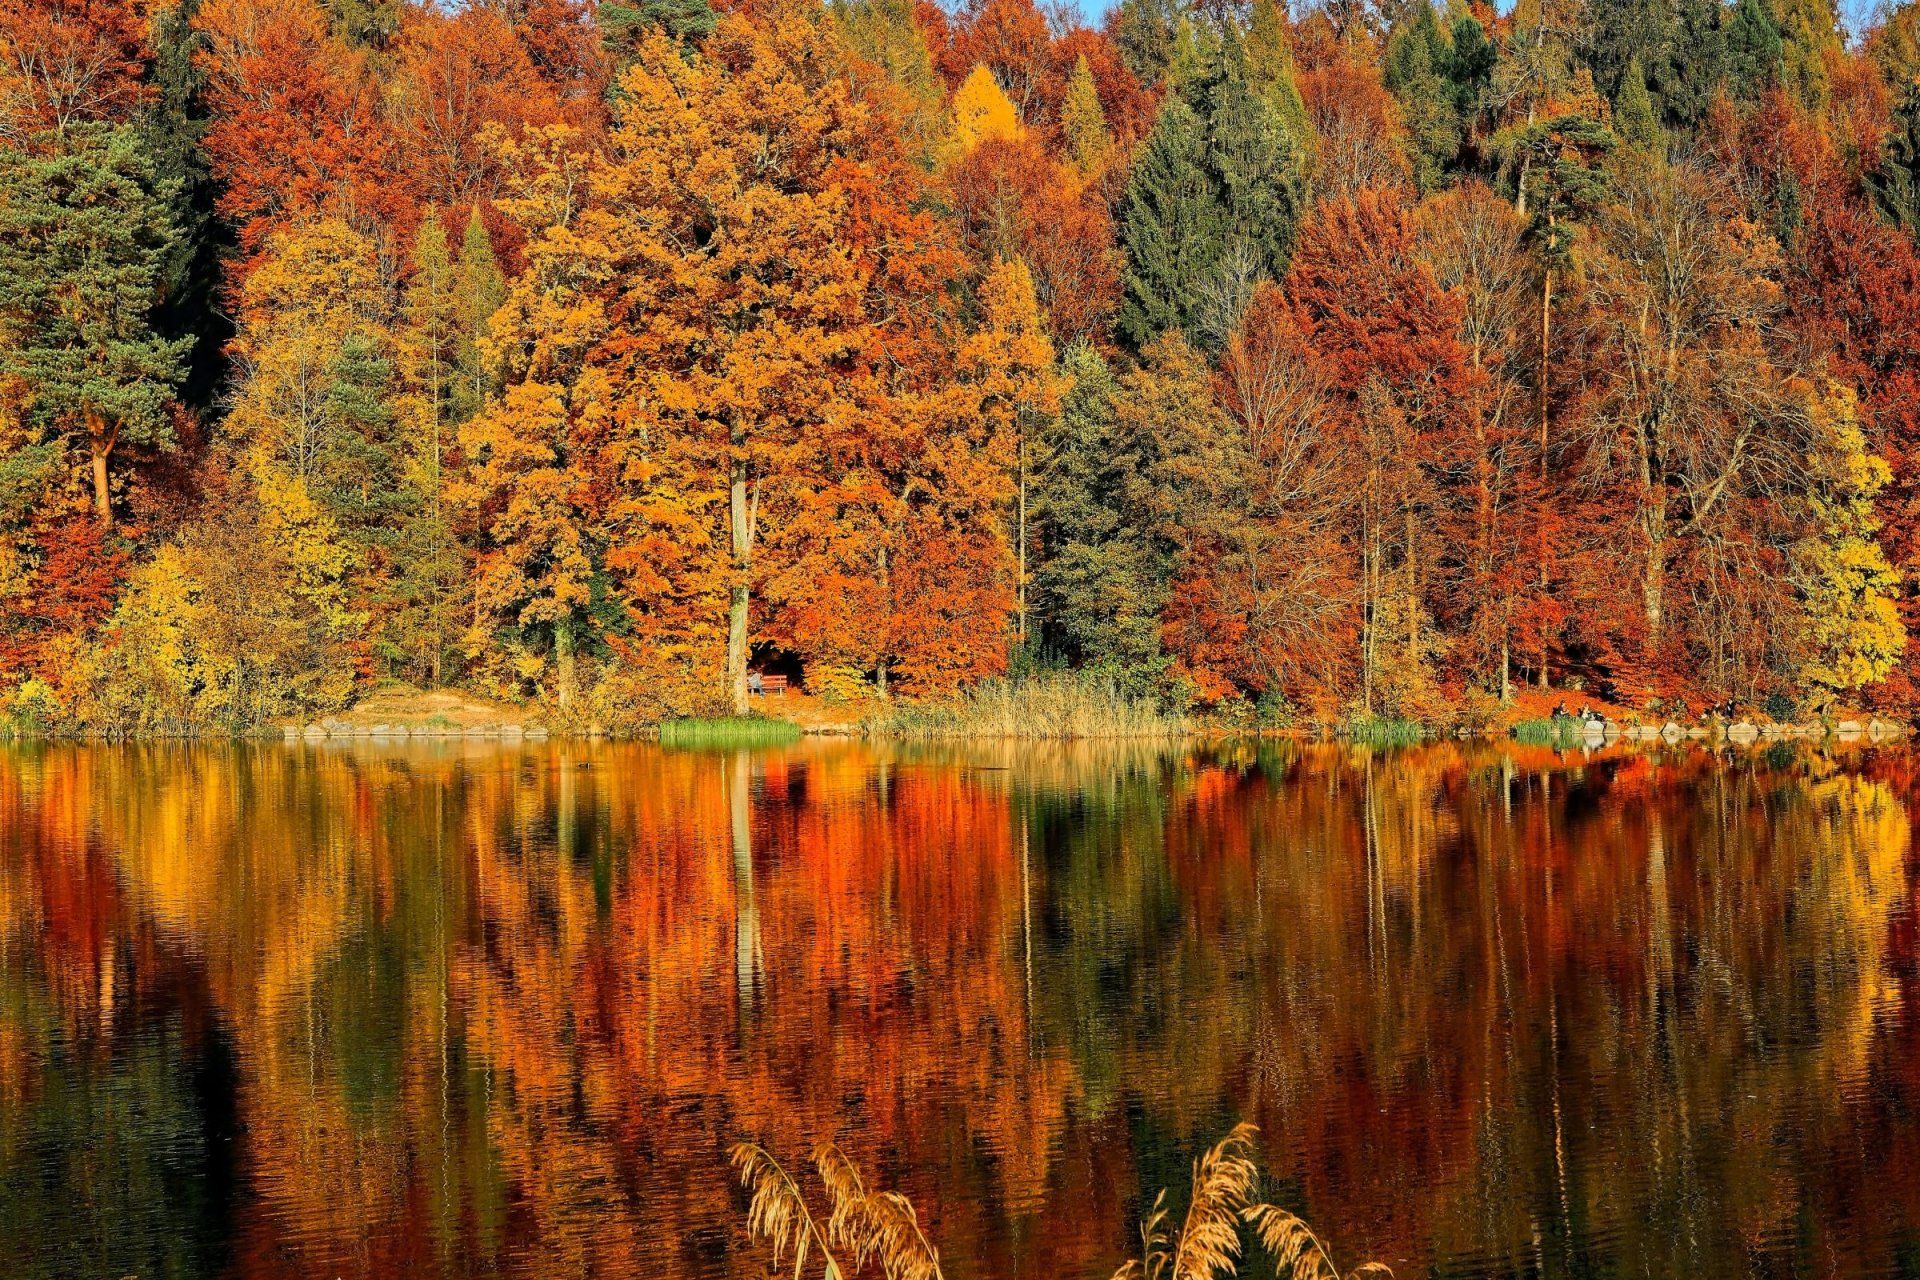 a lake surrounded by trees that are changing colors